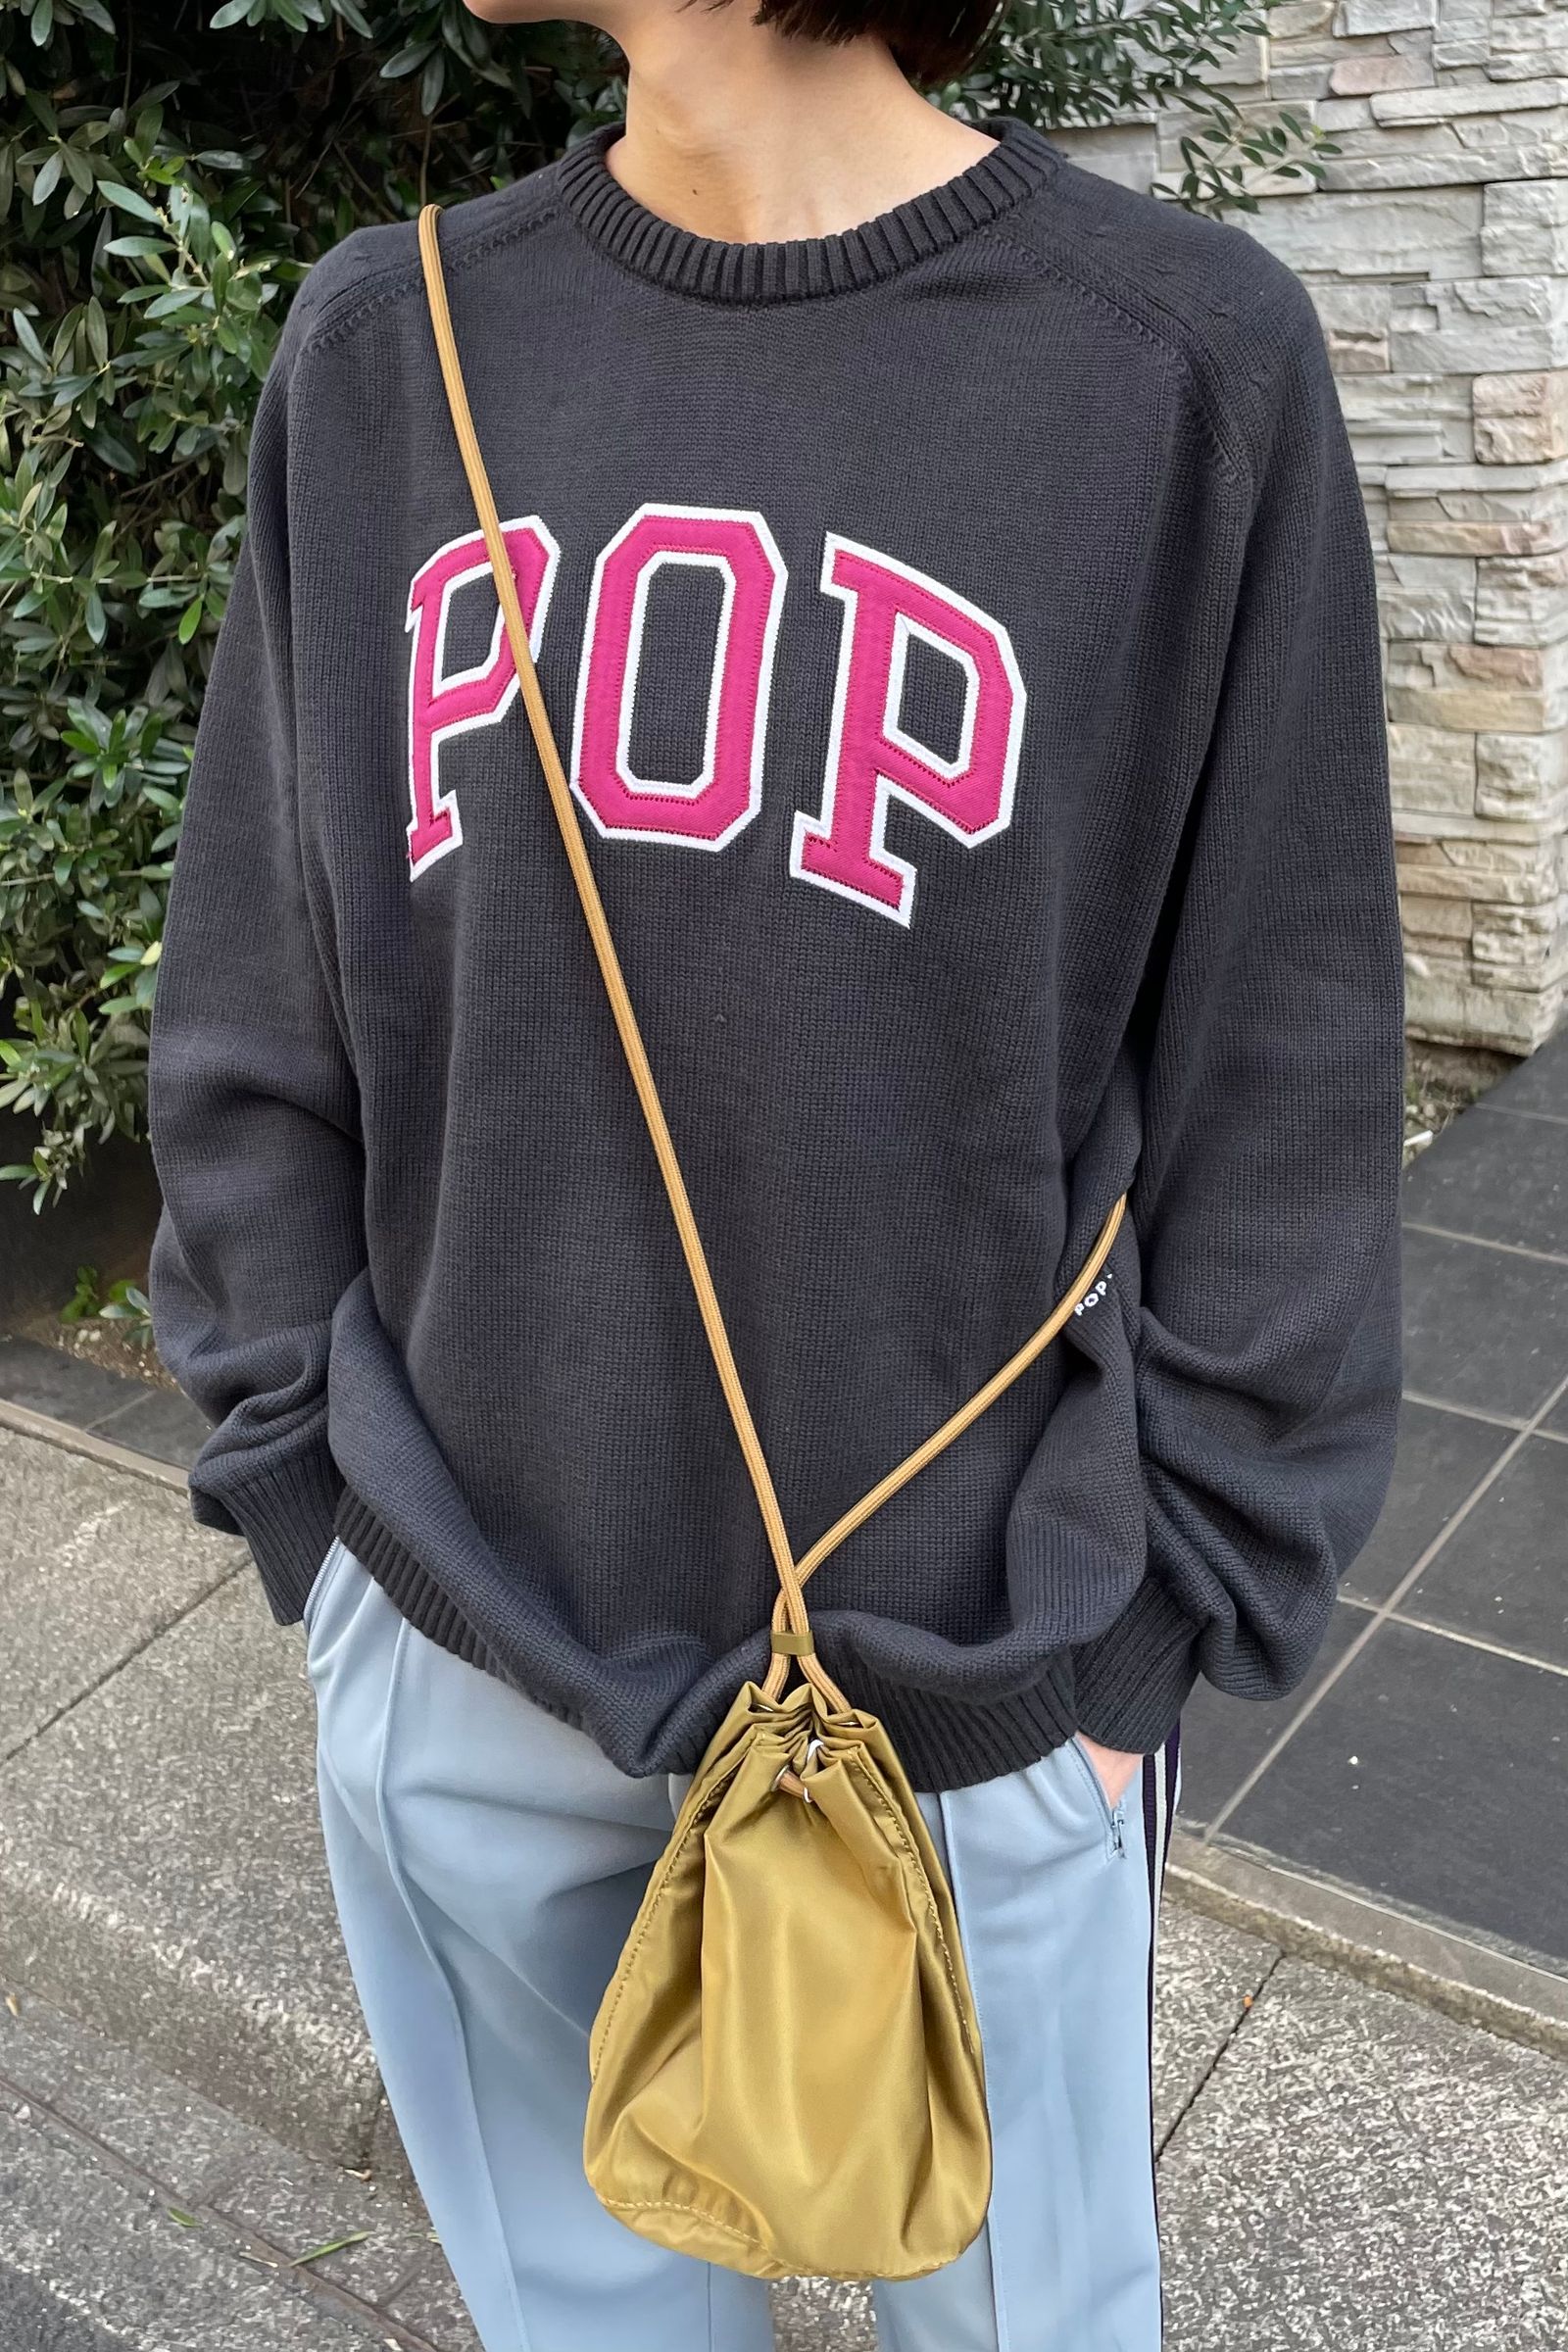 Pop Trading Company - knitted crewneck arch -anthracite/raspberry